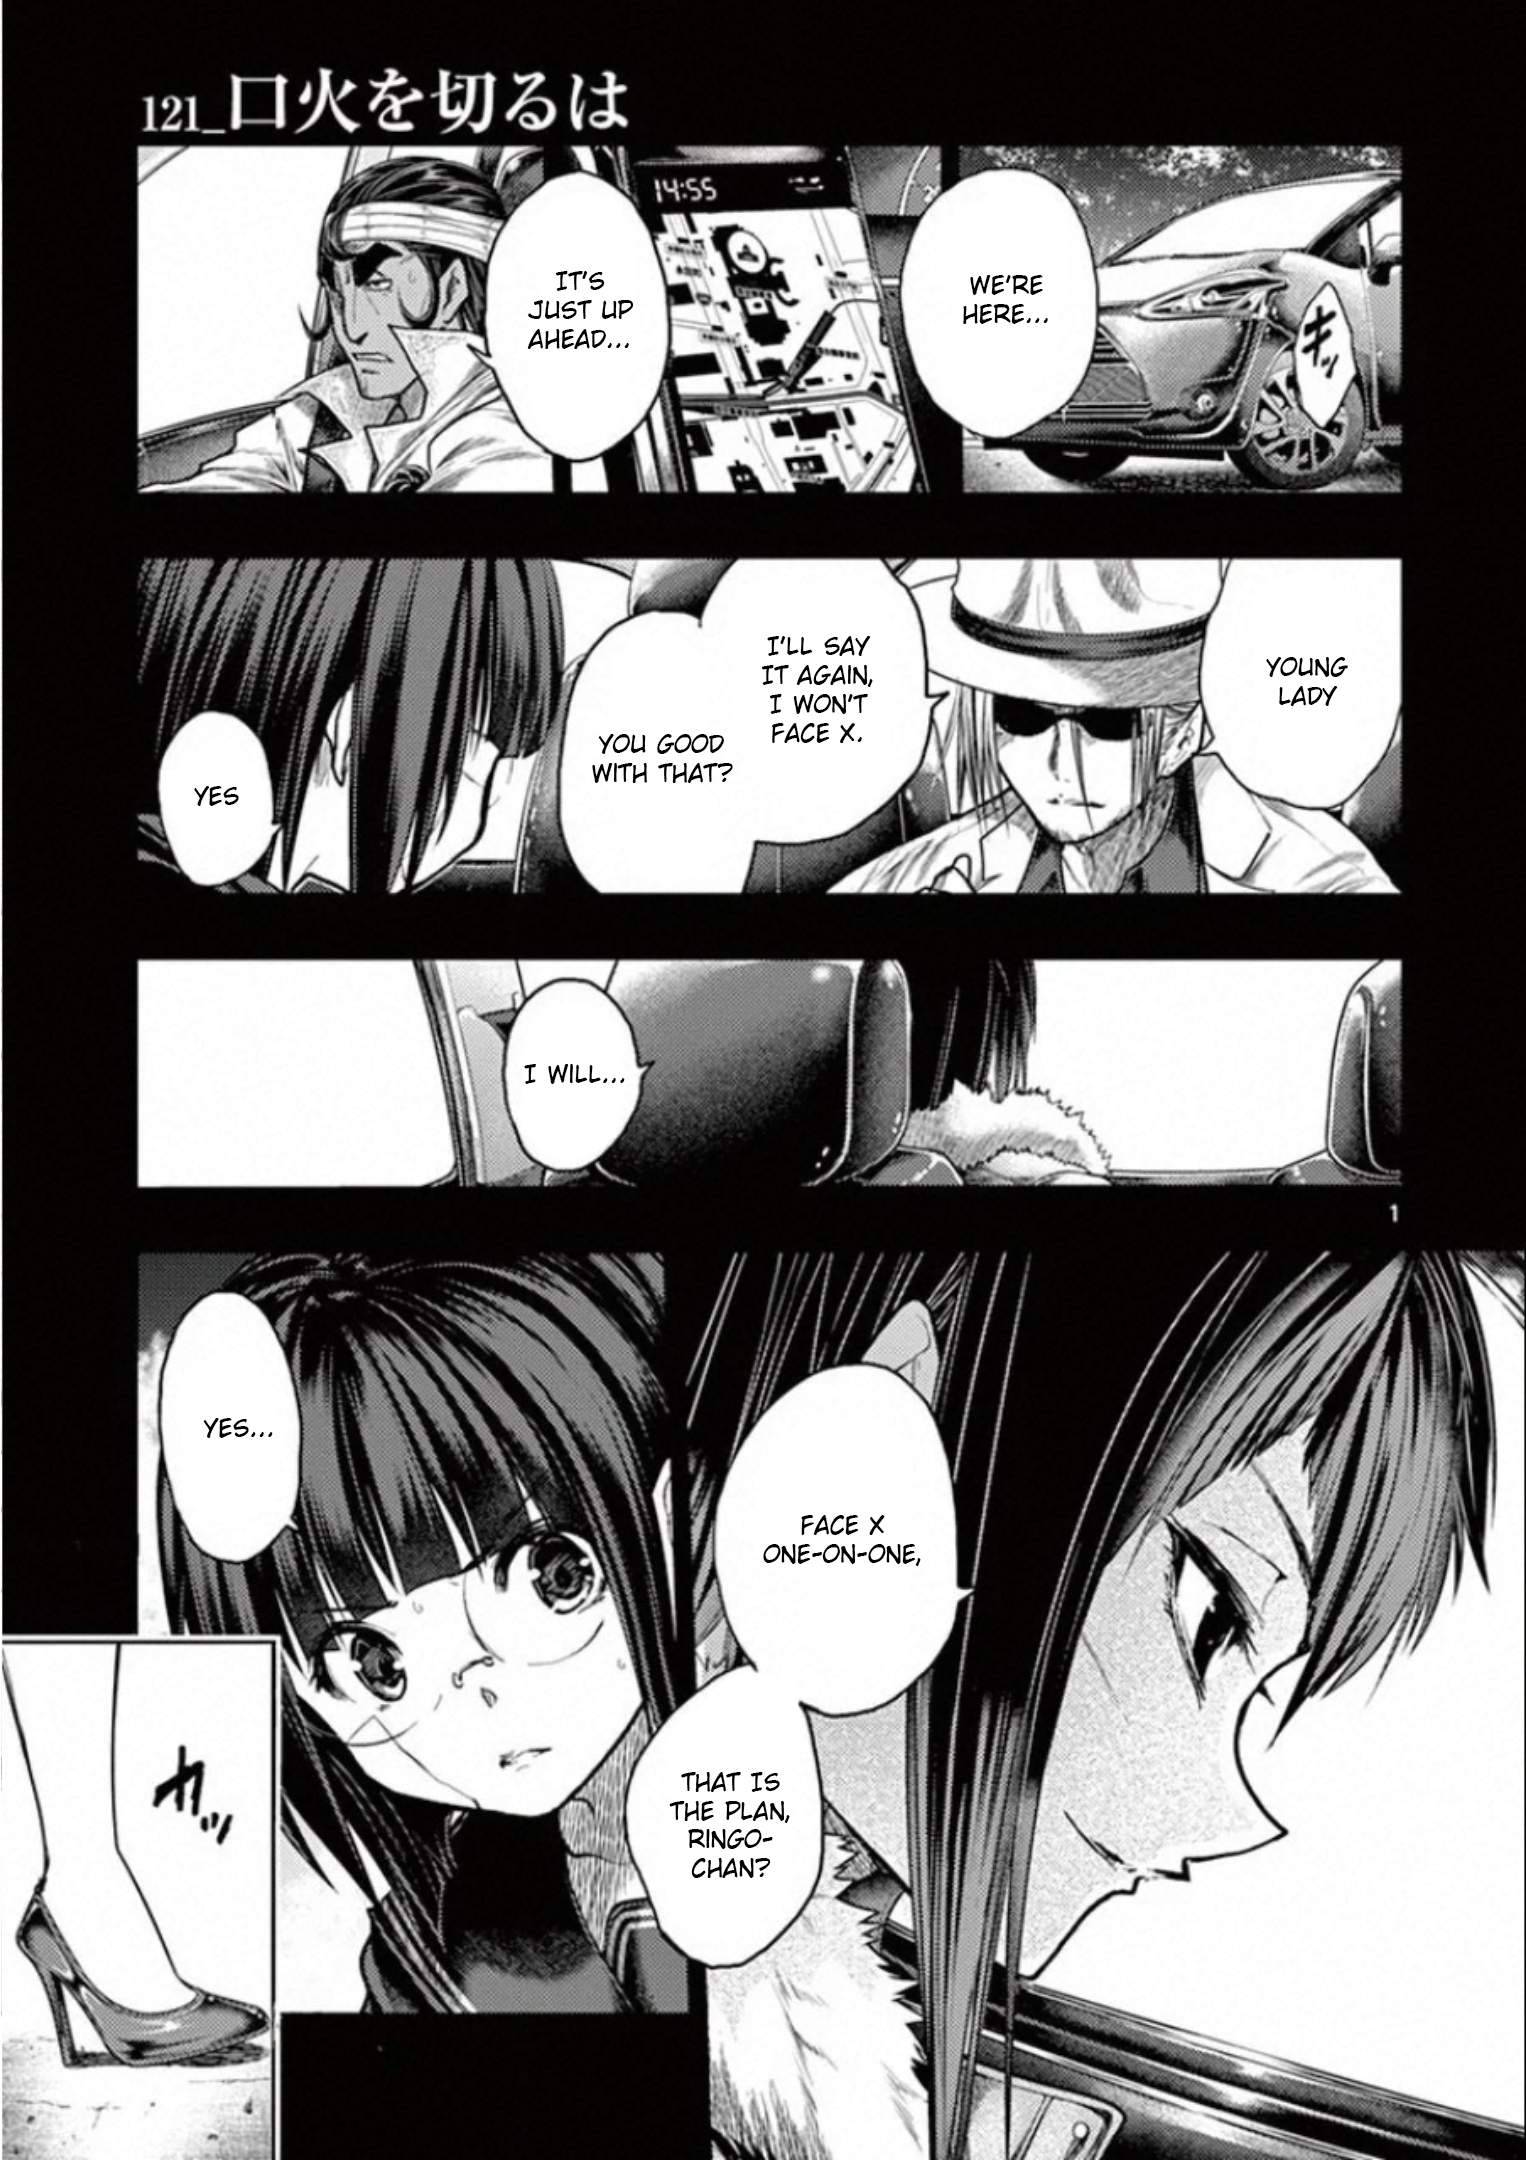 Start Fighting 5 Seconds After Meeting - chapter 121 - #1